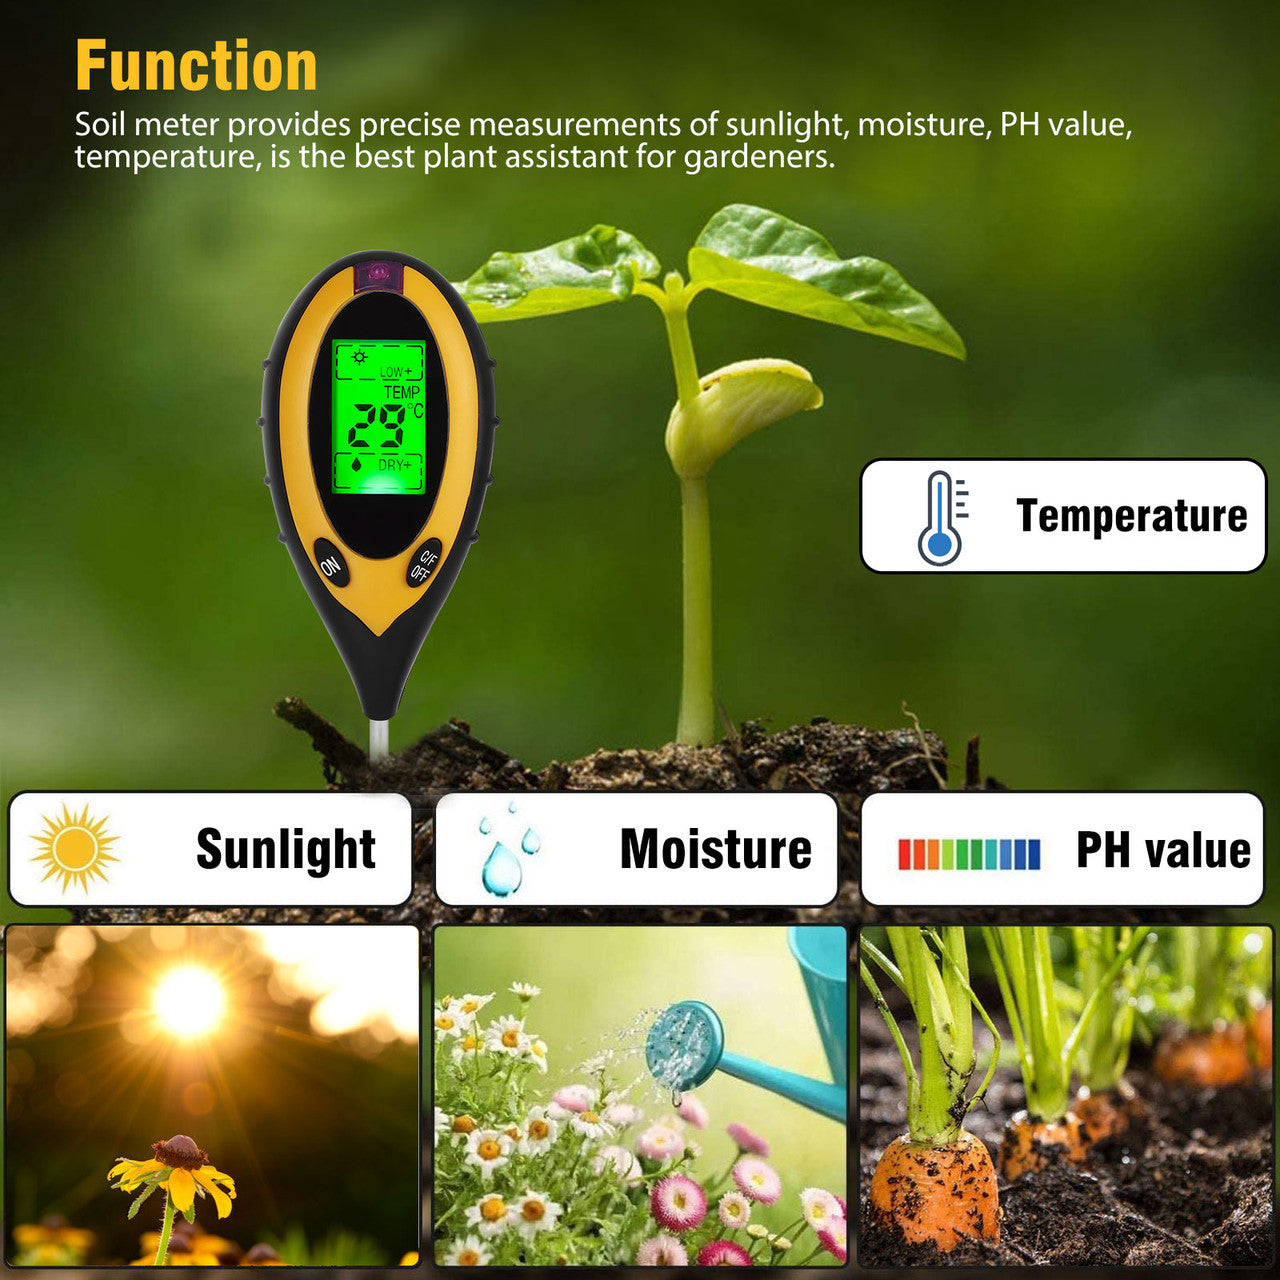 4 in 1 Soil Moisture Sensor Meter Tester, LCD Soil Water Monitor, Soil PH/Humidity/Temperature/Light Tester Hygrometer Great for Garden, Farm, Lawn, Plant Indoor & Outdoor Care Tool, Battery Included